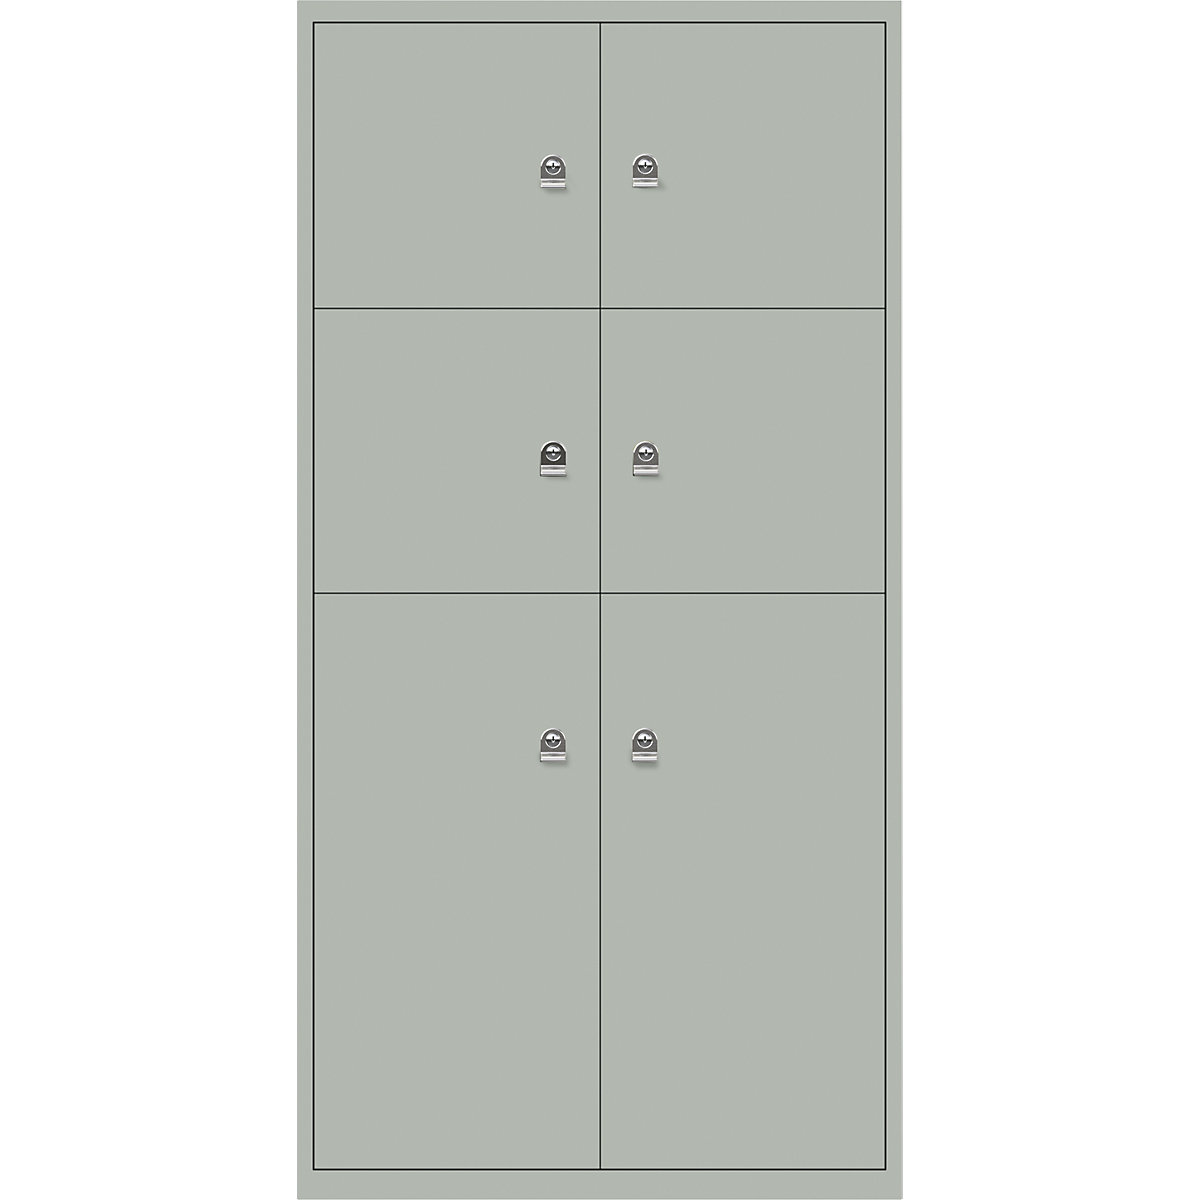 LateralFile™ lodge – BISLEY, with 6 lockable compartments, height 4 x 375 mm, 2 x 755 mm, york-30